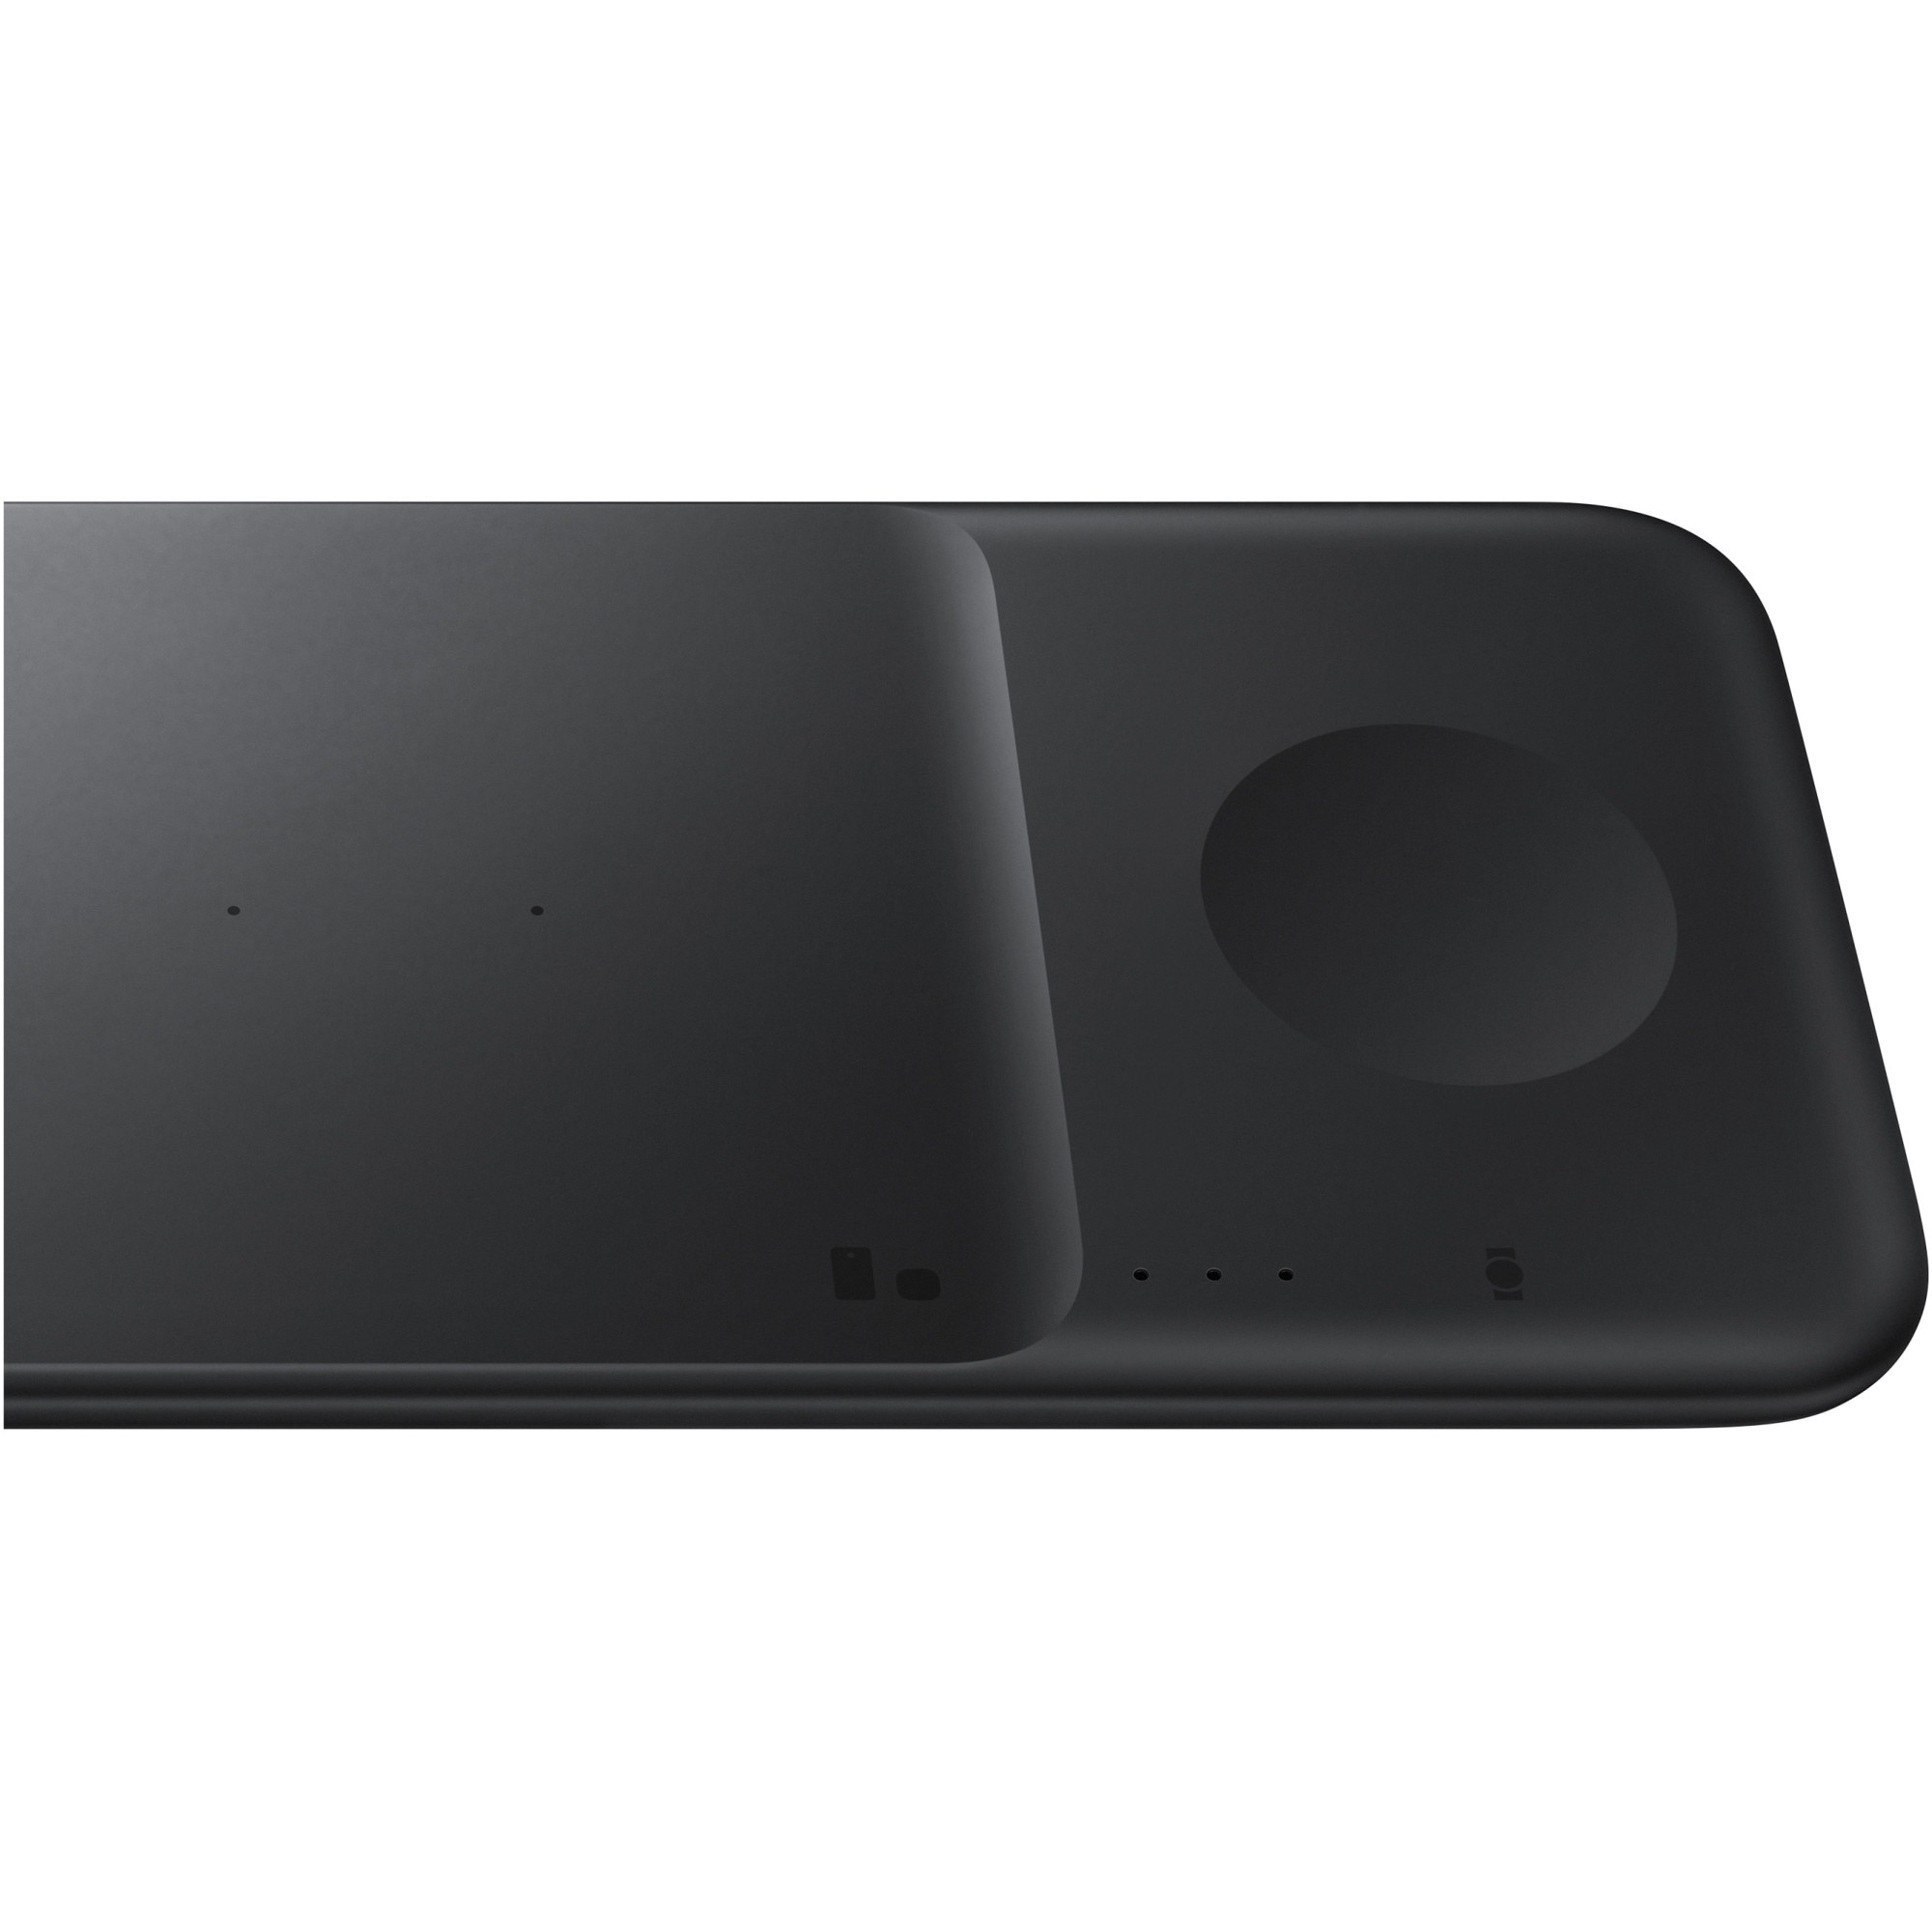 Wireless Charger Trio, Black Mobile Accessories - EP-P6300TBEGUS